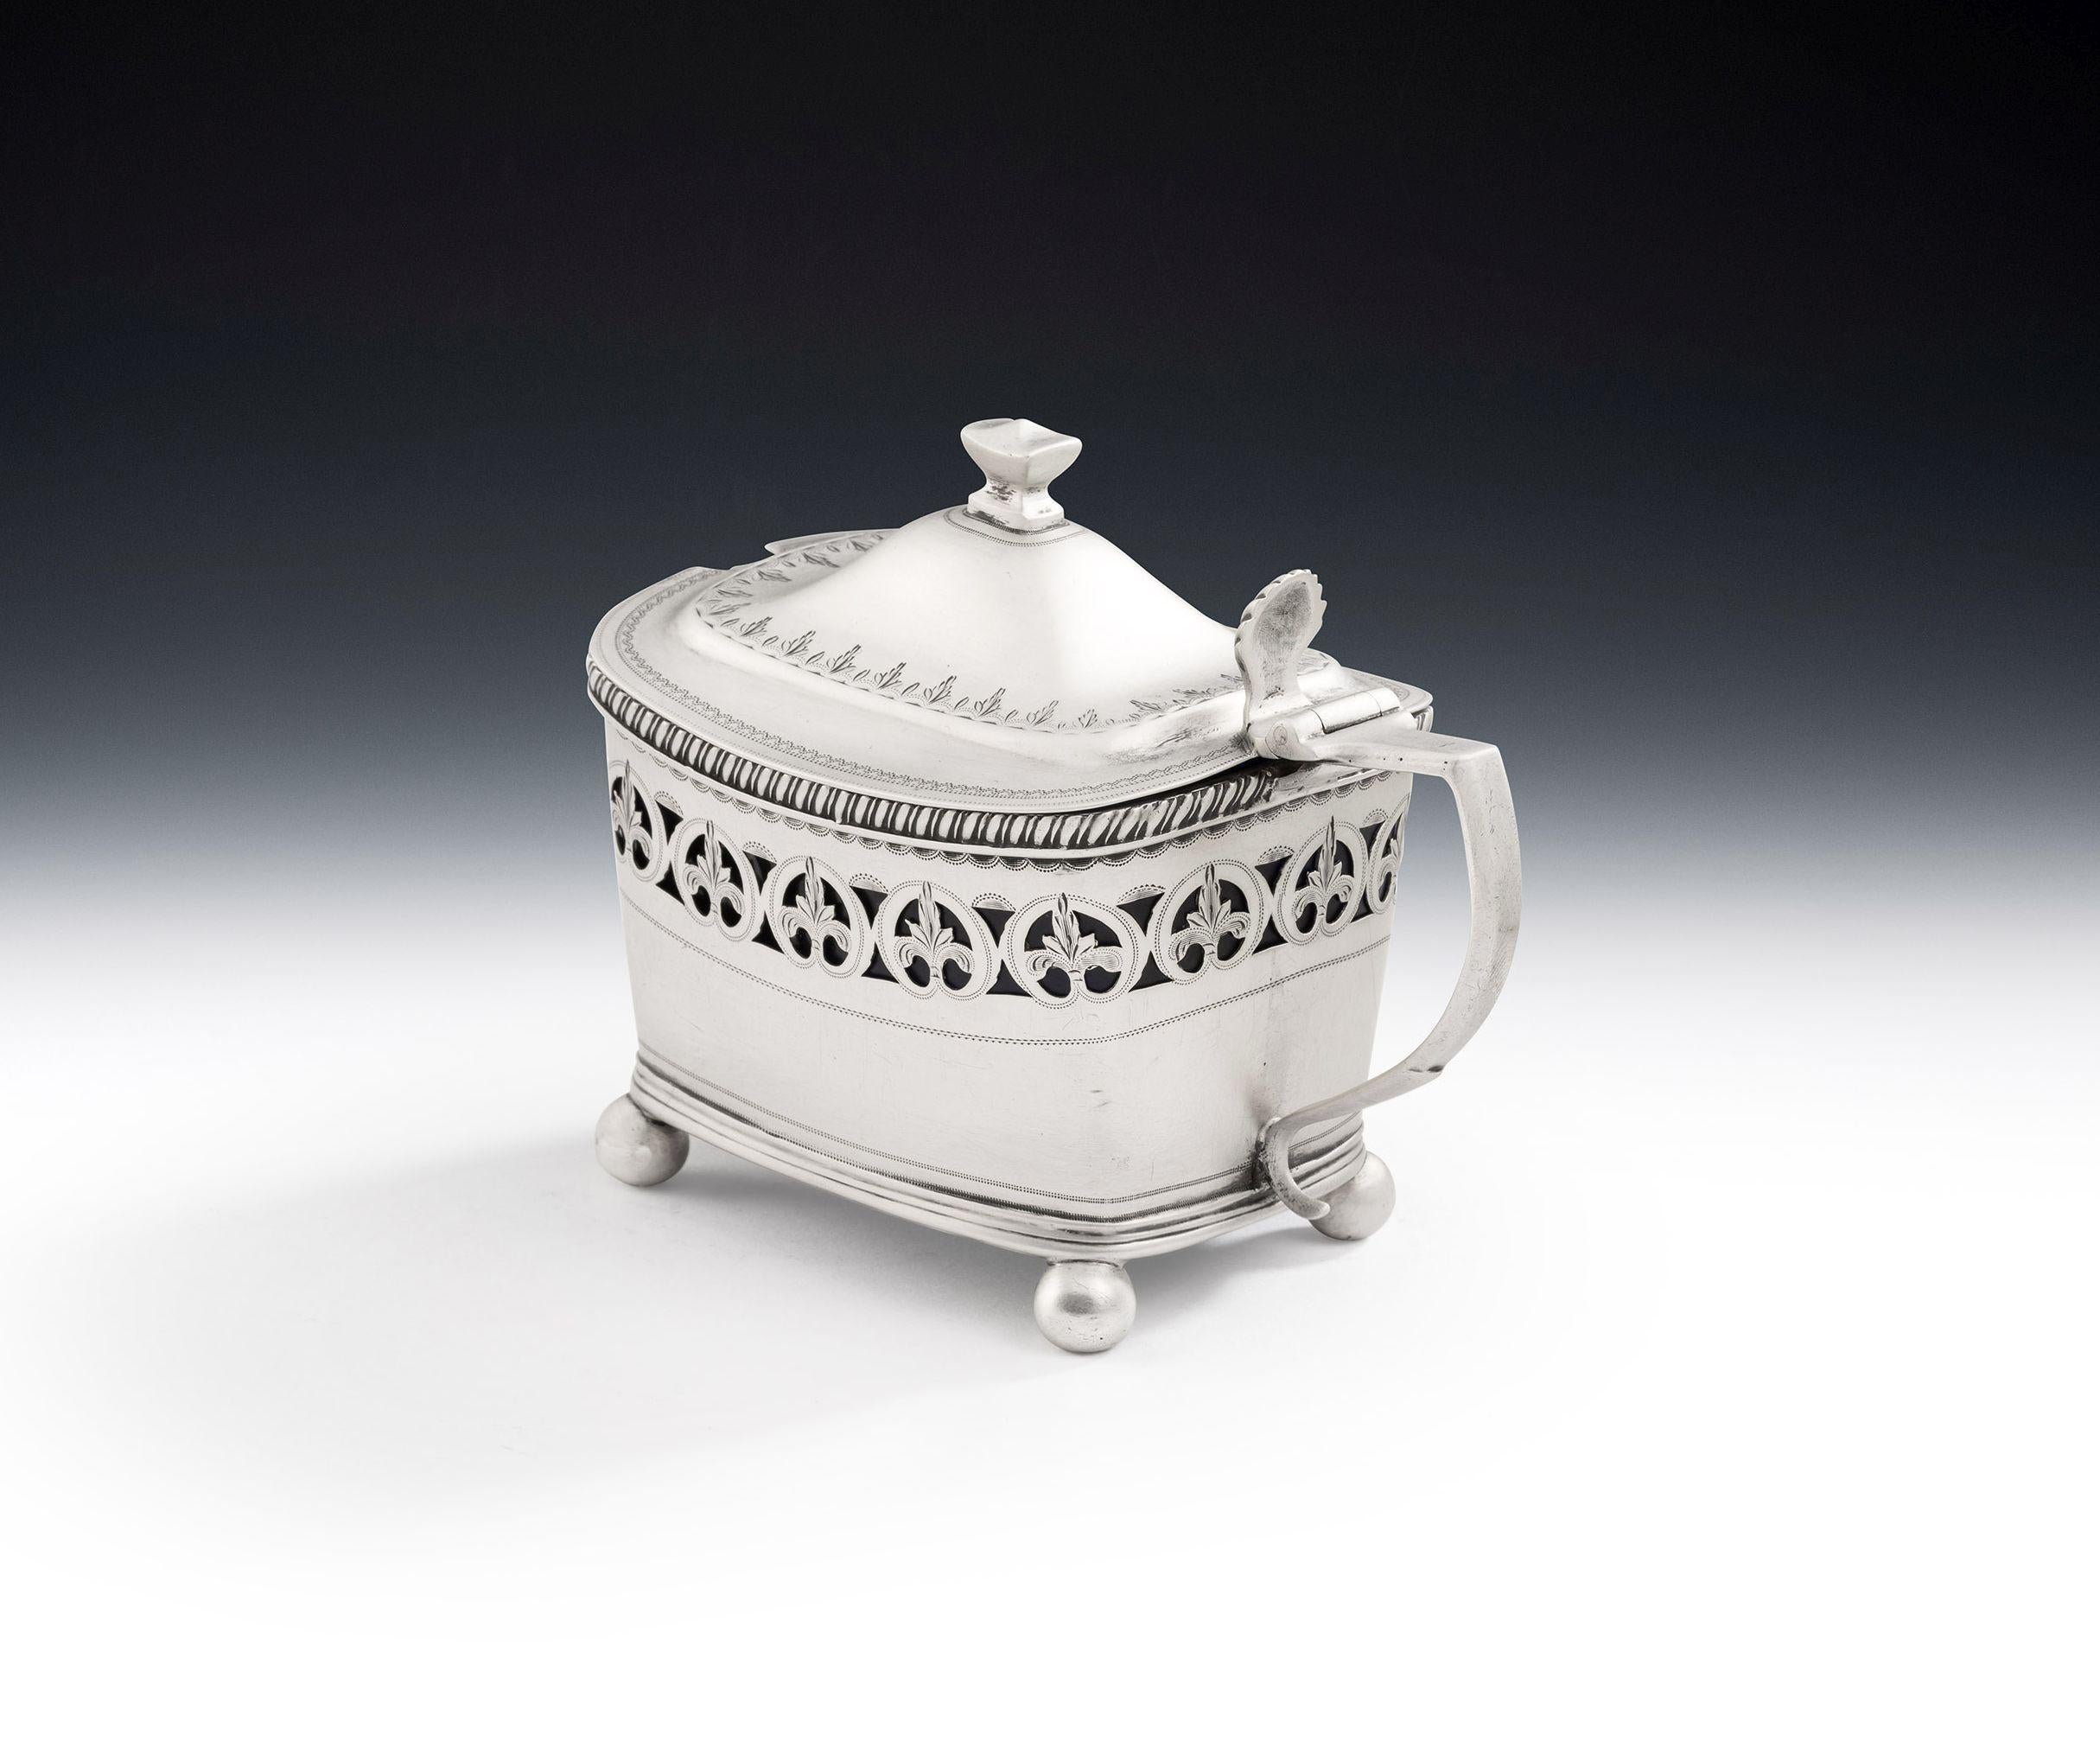 British George III Mustard Pot Made in London in 1811 by Peter & William Bateman For Sale